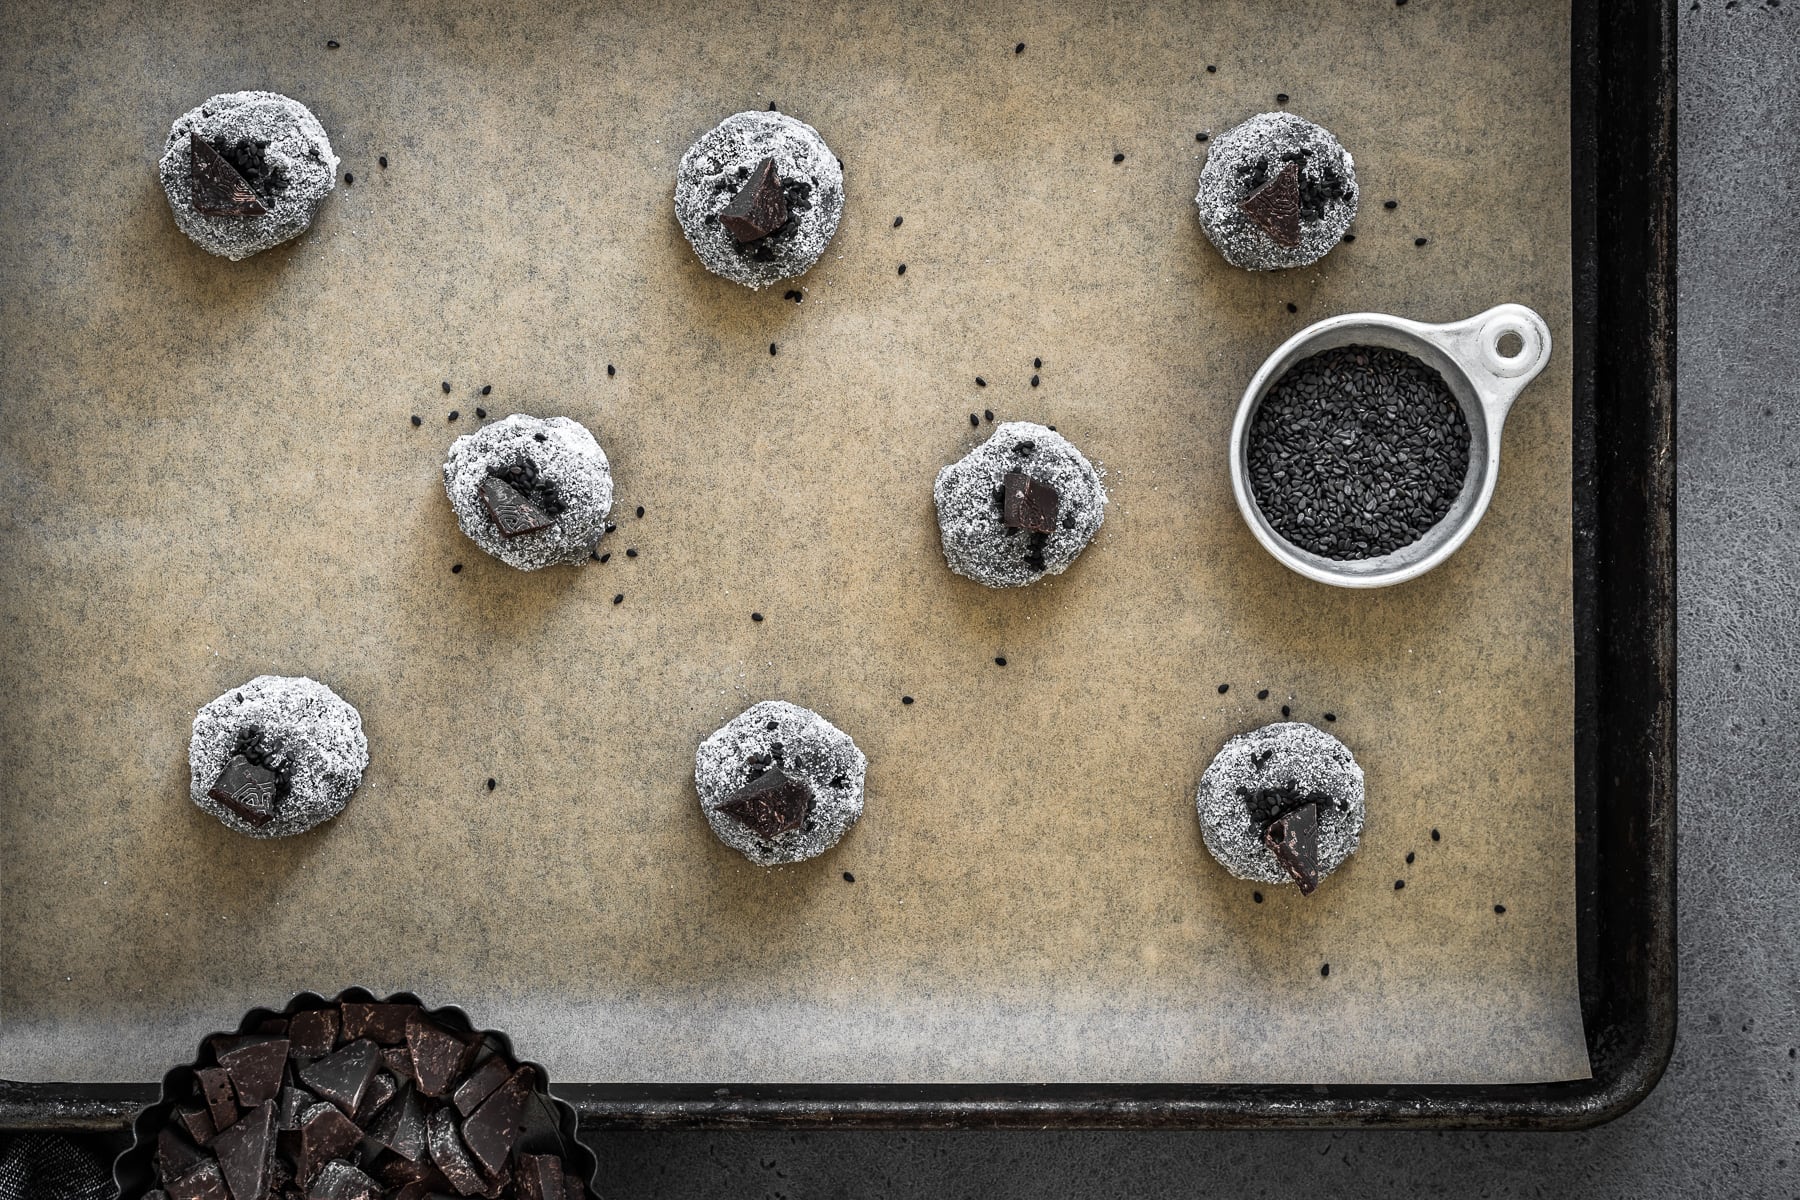 Balls of cookie dough rolled in sugar, sprinkled with seeds and topped with chocolate chunks on a parchment lined baking sheet.